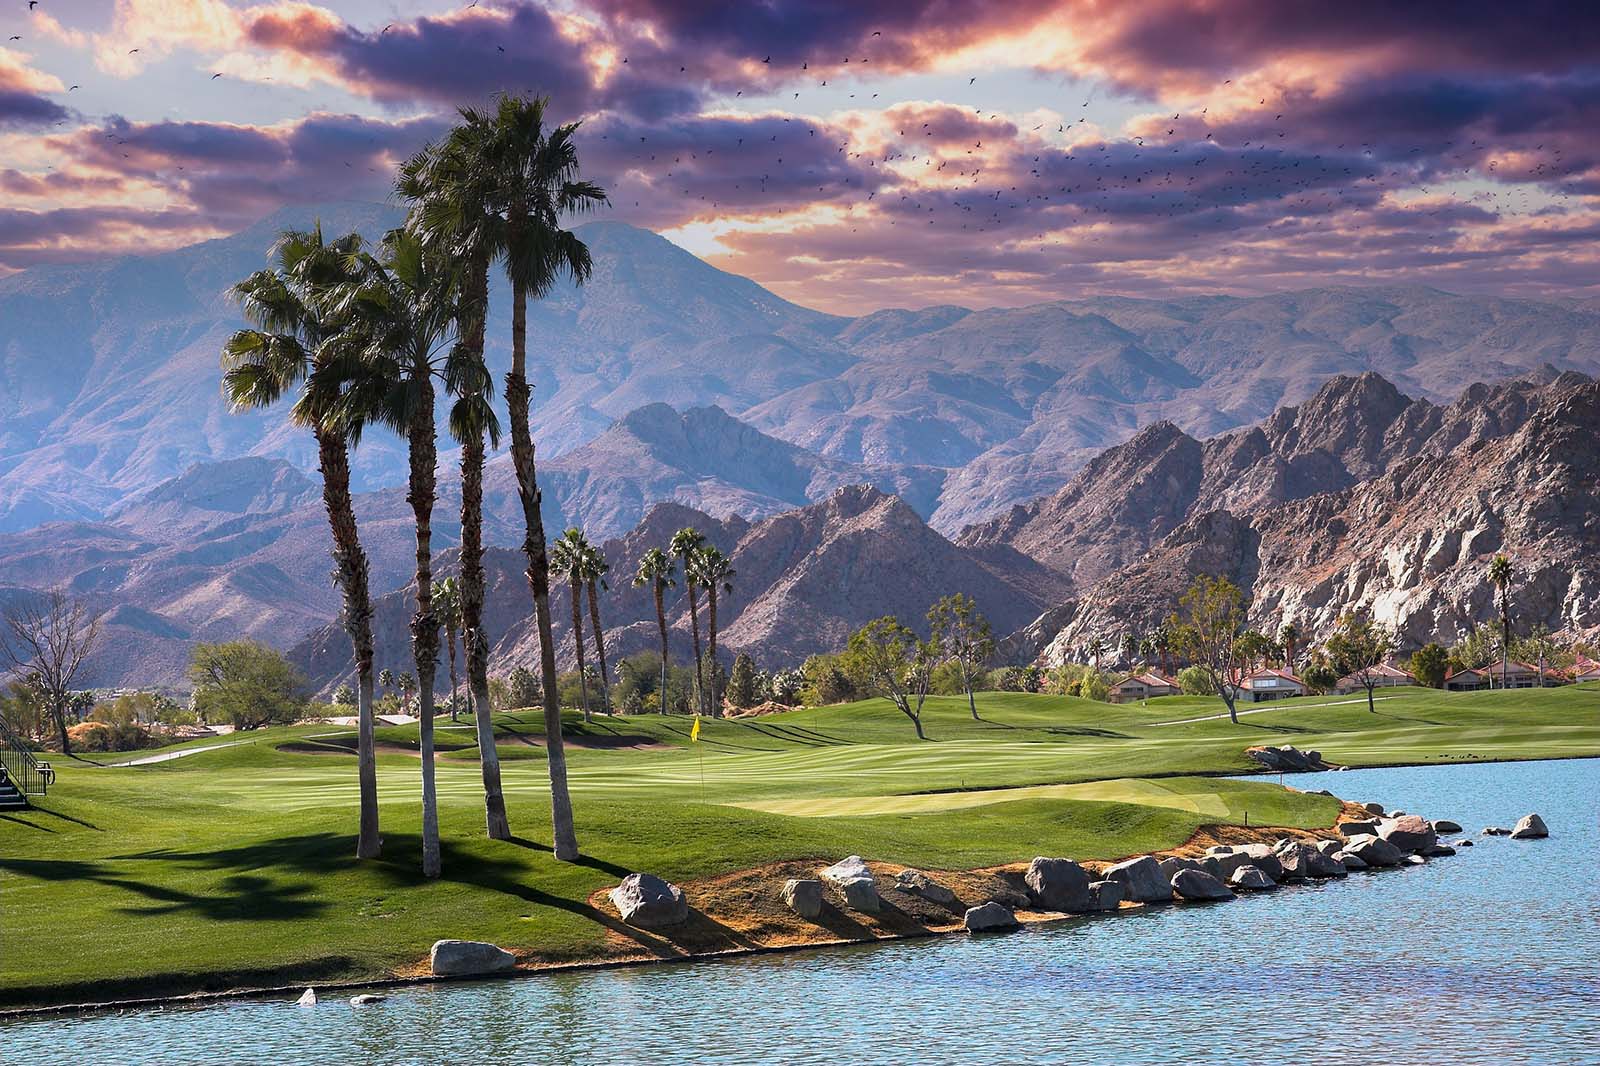 One of the many golf courses in Palm Springs.